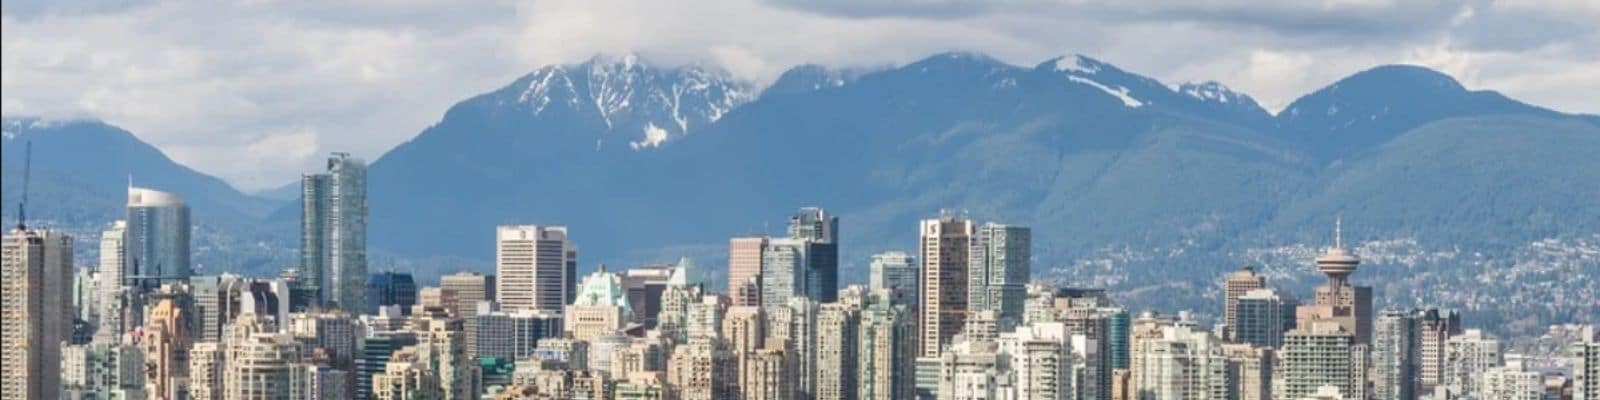 5 Best Digital Marketing Courses in Vancouver You Must Know